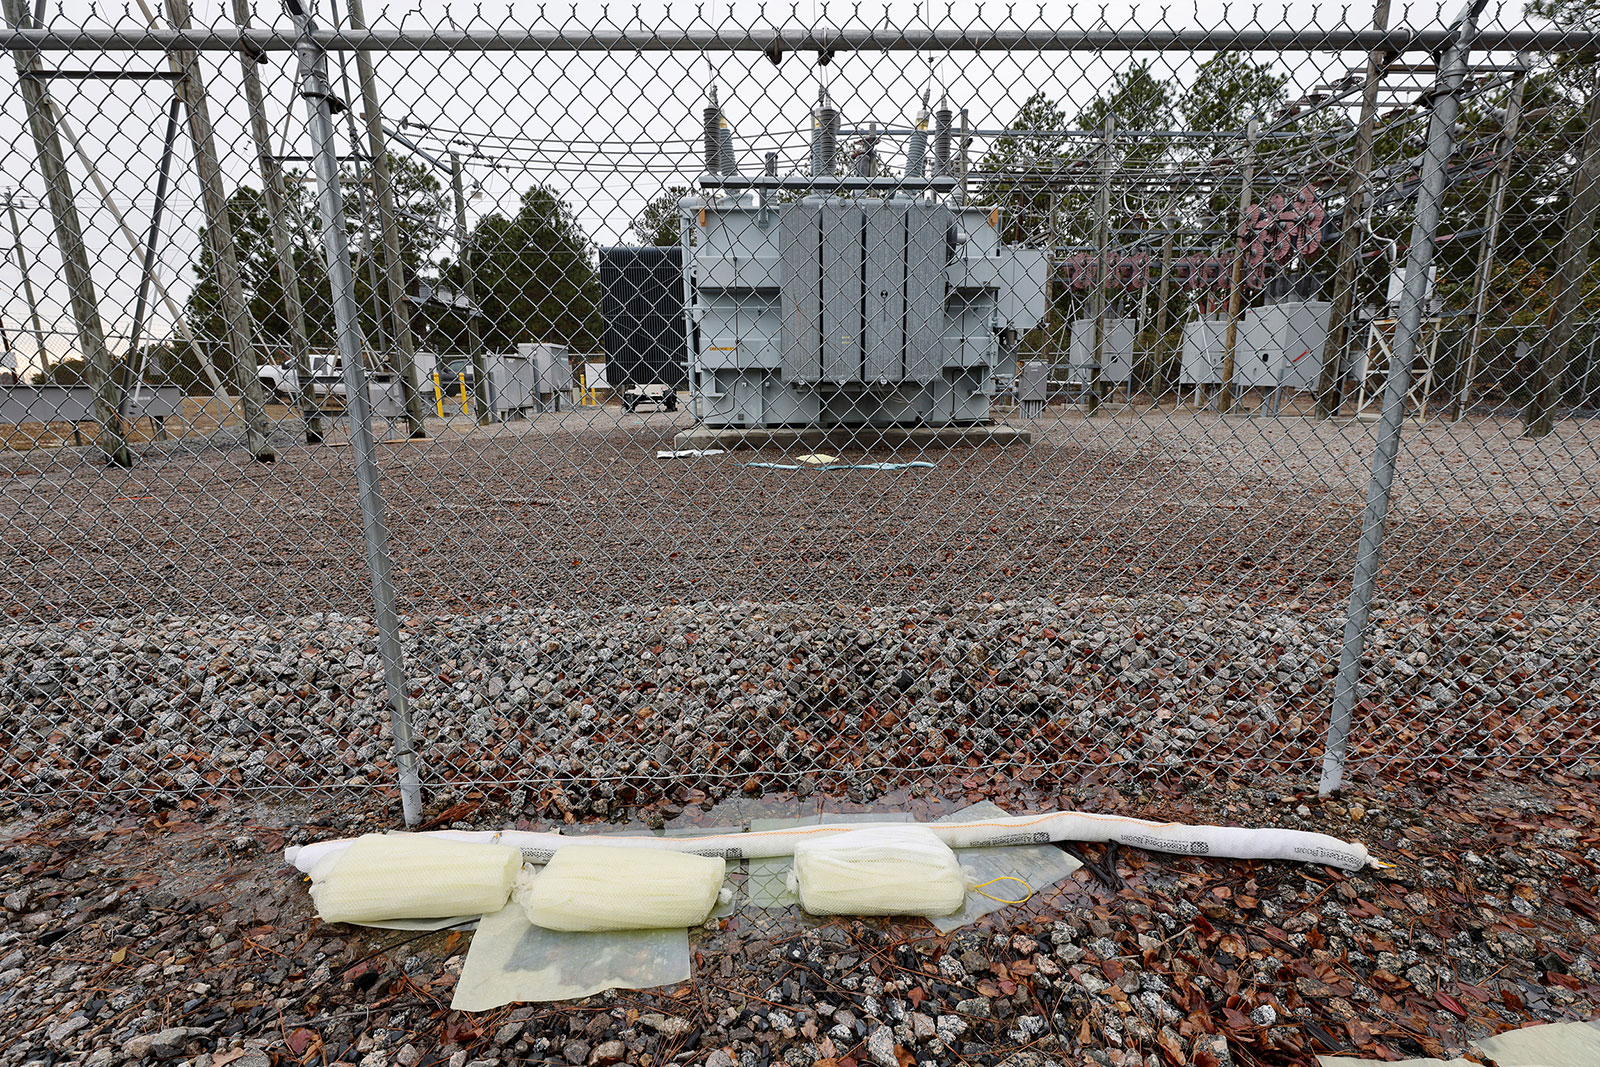 Barriers designed to absorb oil are placed near a damaged transformer in Carthage, North Carolina, on December 4.